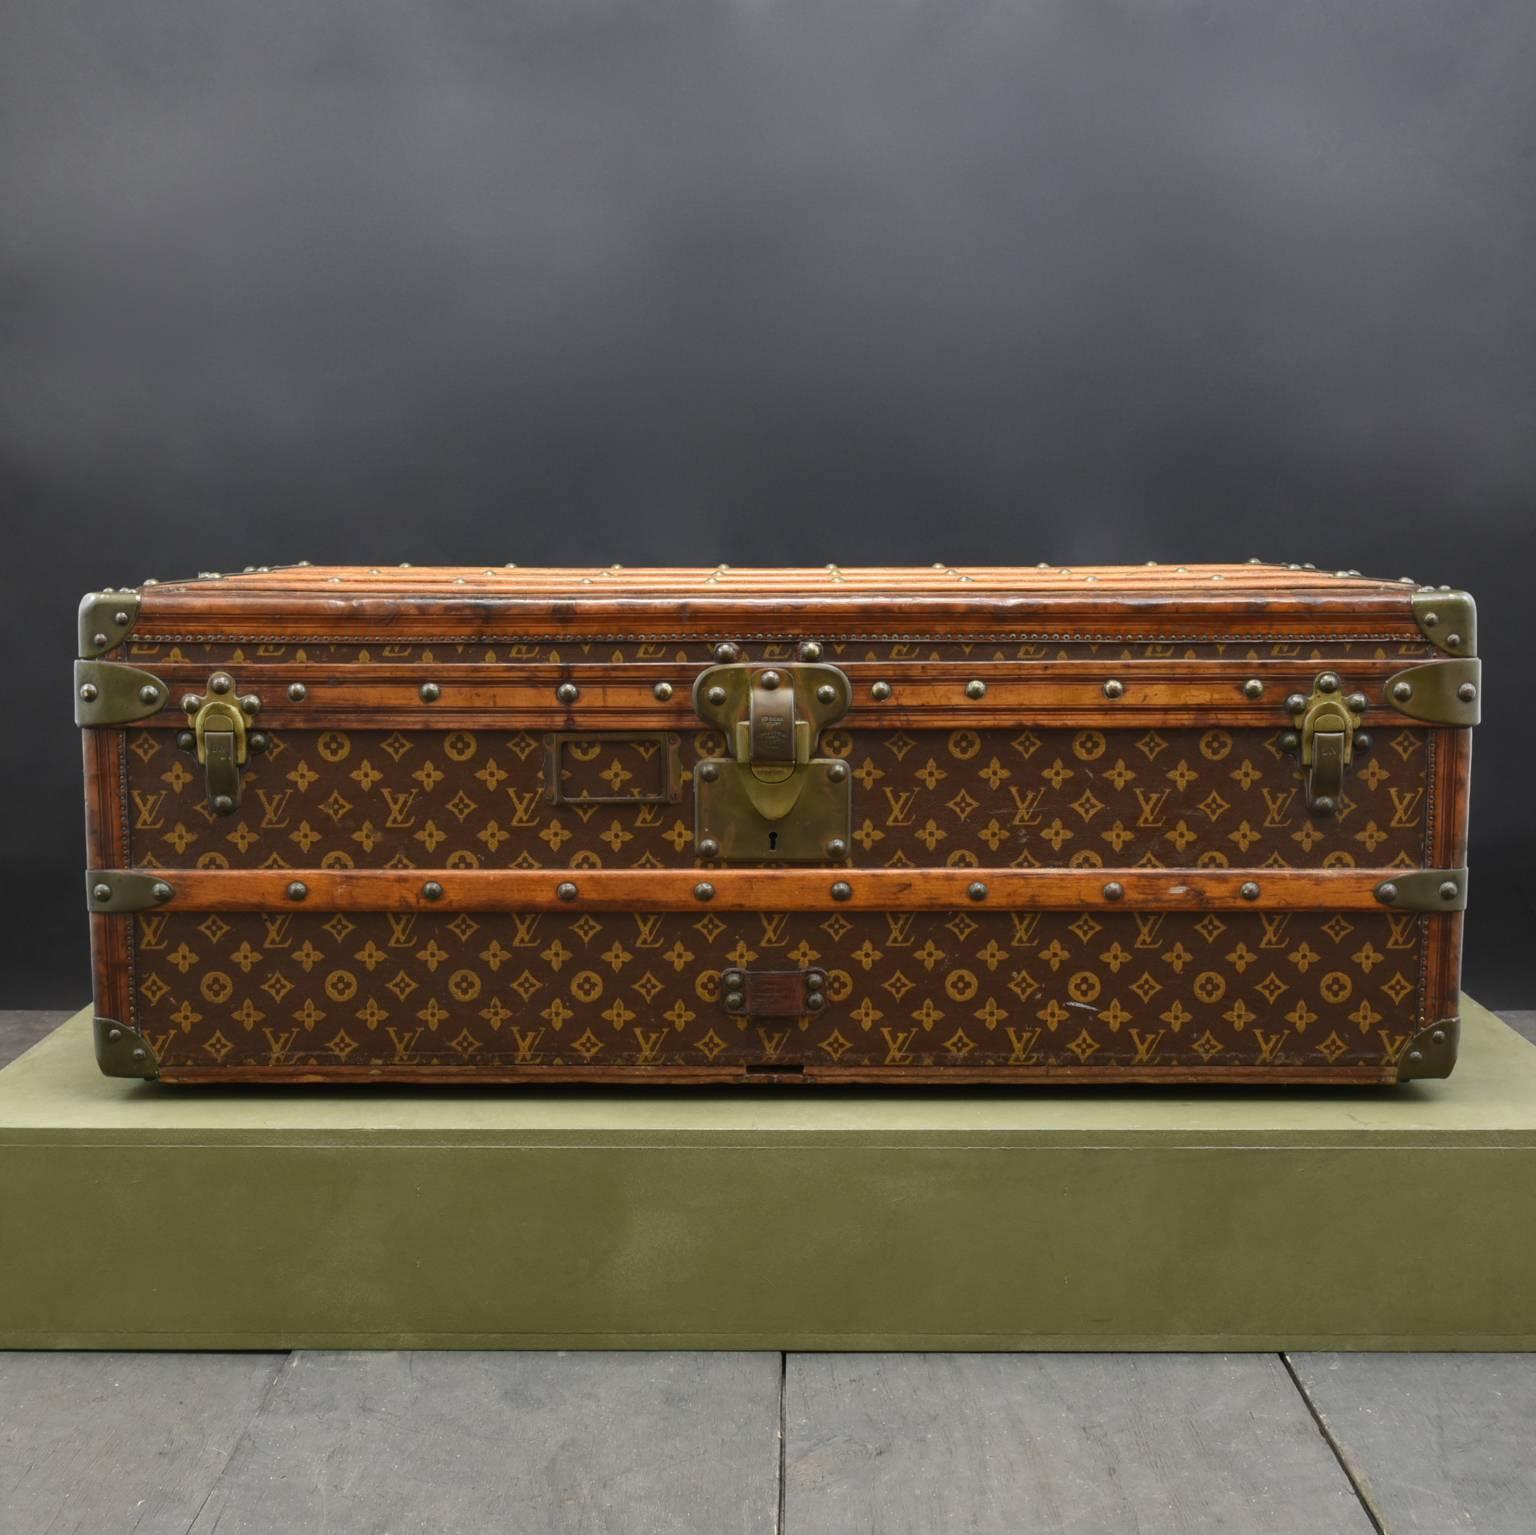 A Louis Vuitton LV Monogram Cabin Trunk c1905 in exceptional original condition. This lovely cabin trunk with leather trim, un-polished patinated brass handles and fittings and original interior with original tray. This trunk is in superb condition